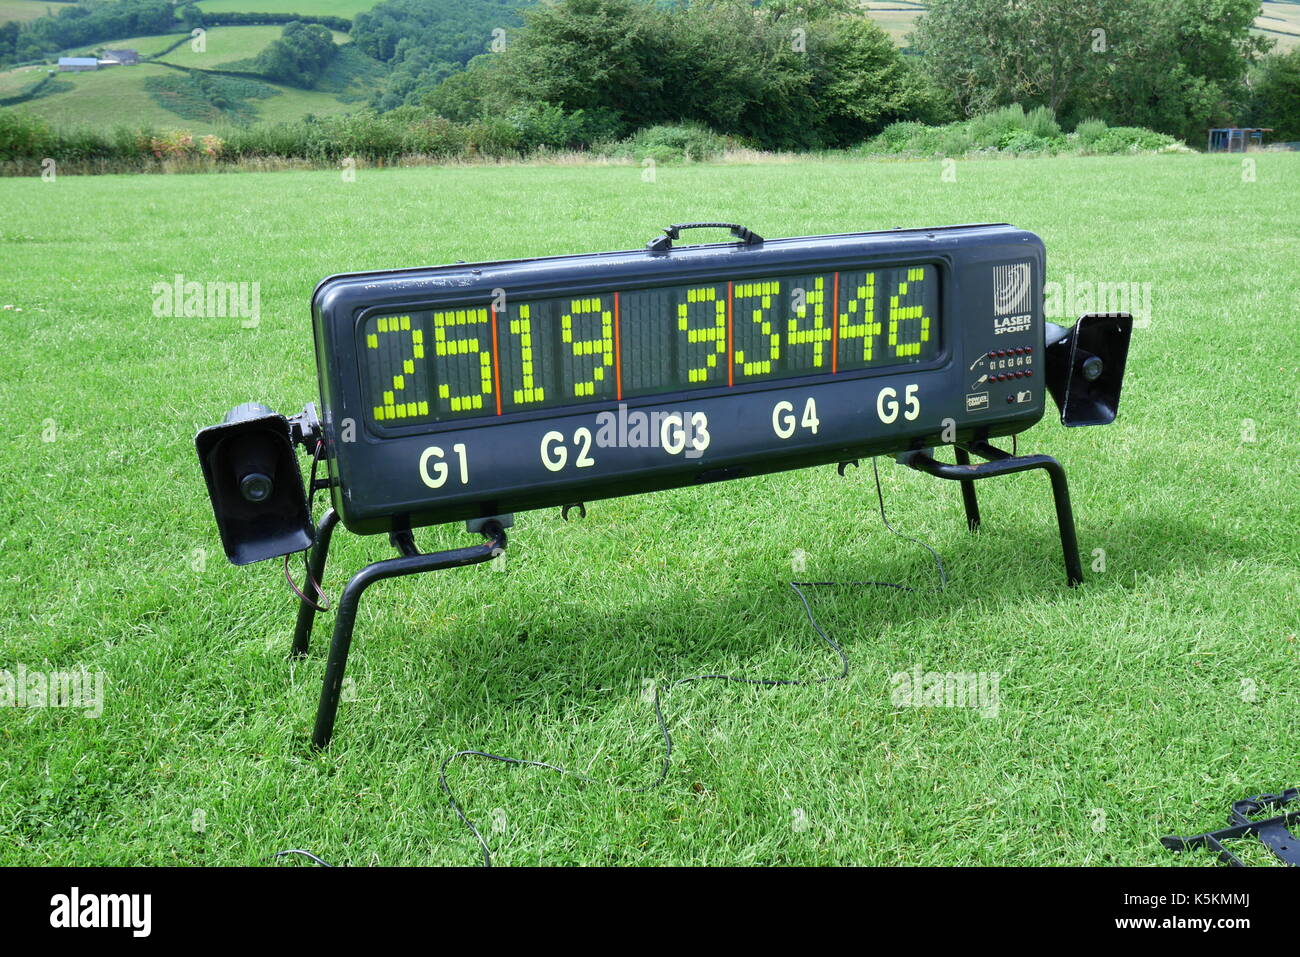 Electronic scoreboard used in competitive laser clay pigeon shooting Stock Photo